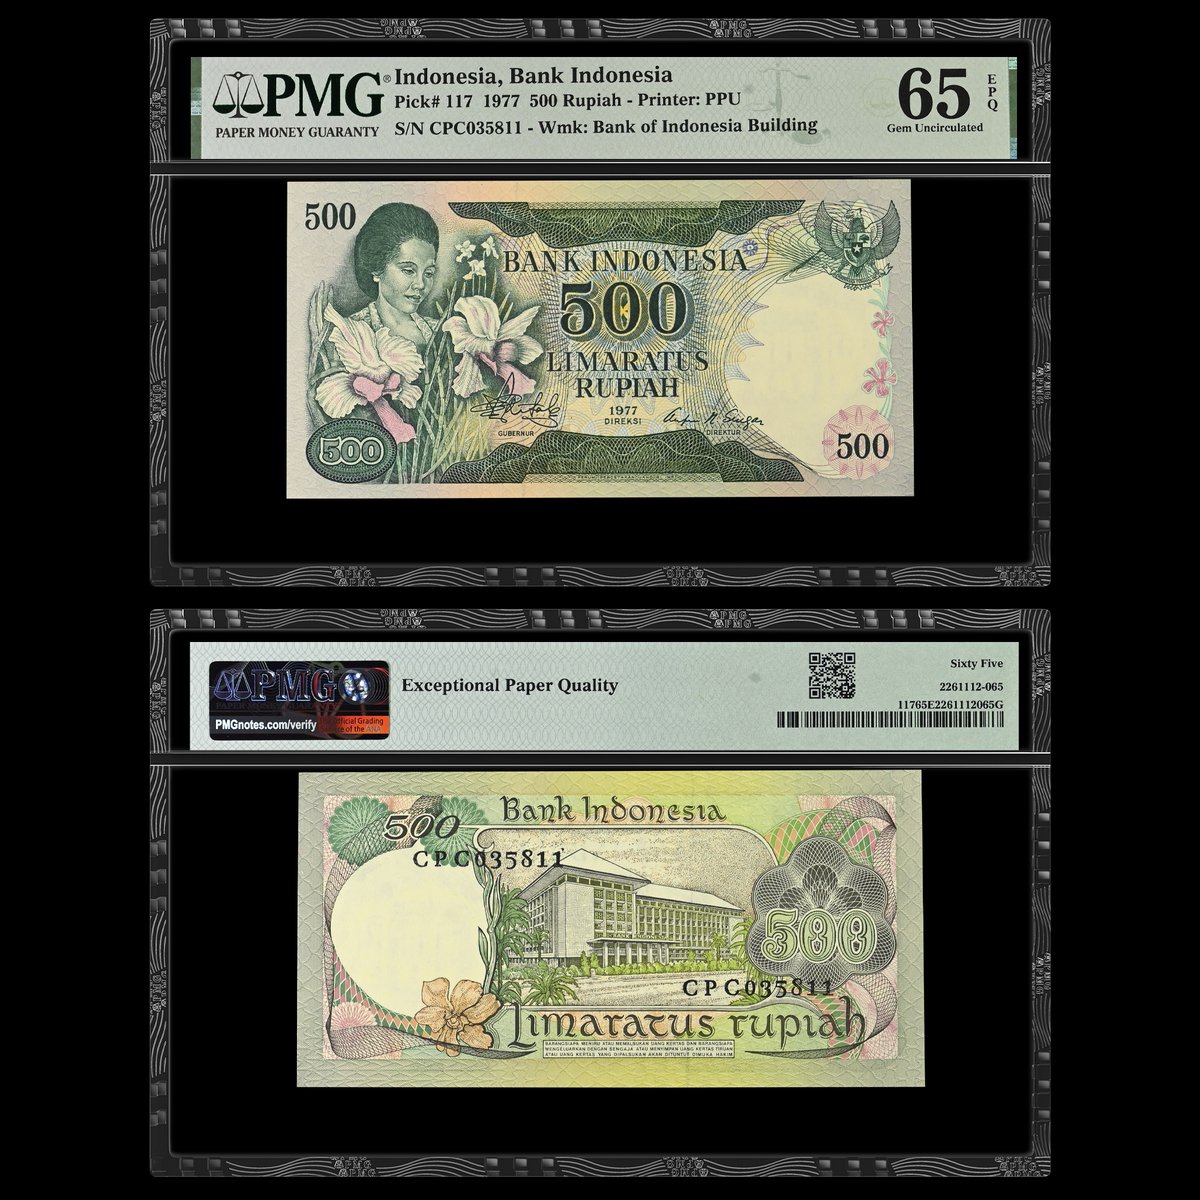 Note of the Day: The front of today’s #WomenWednesday featured banknote portrays Rachmi Hatta, the wife of former Indonesian Prime Minister Mohammad Hatta. Check out this Indonesia, Bank Indonesia 1977 500 Rupiah graded PMG 65 Gem Uncirculated EPQ.